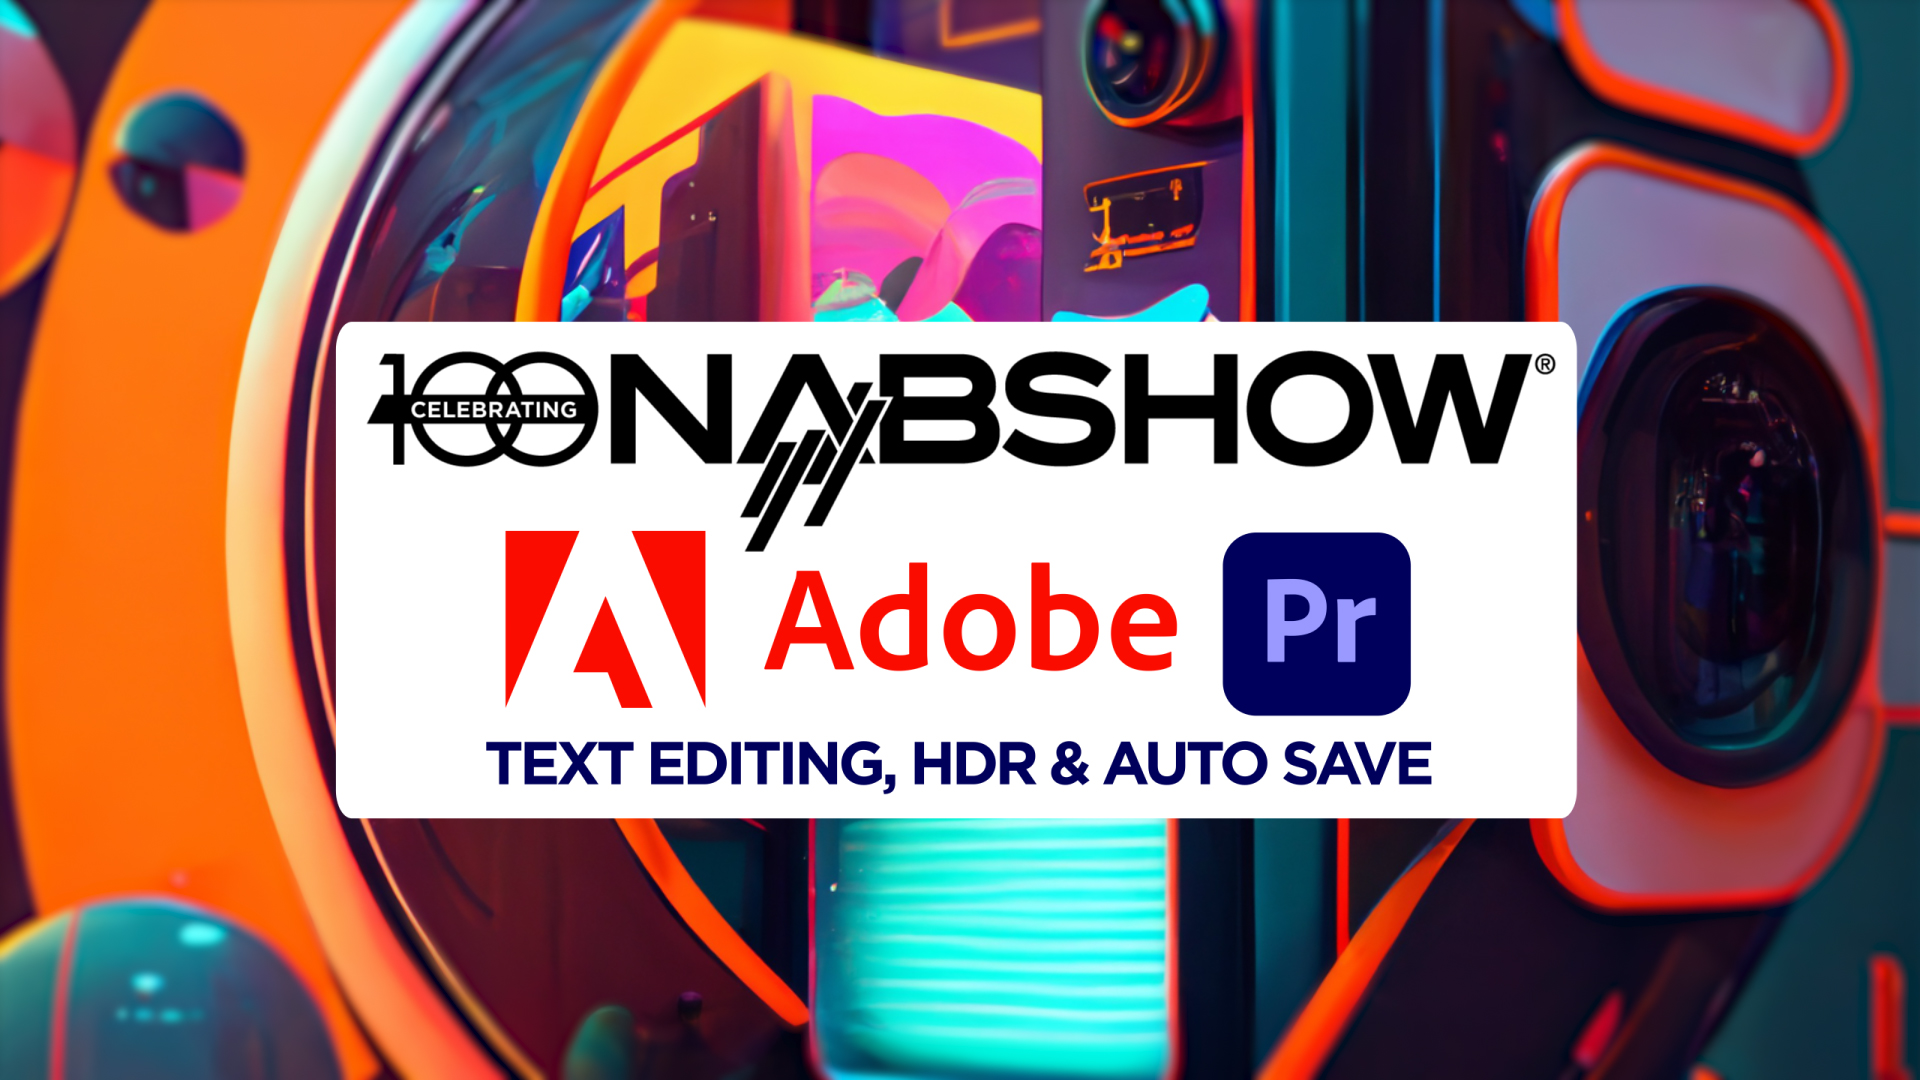 TextBased Video Editing, HDR Match and Auto Save This is the NAB